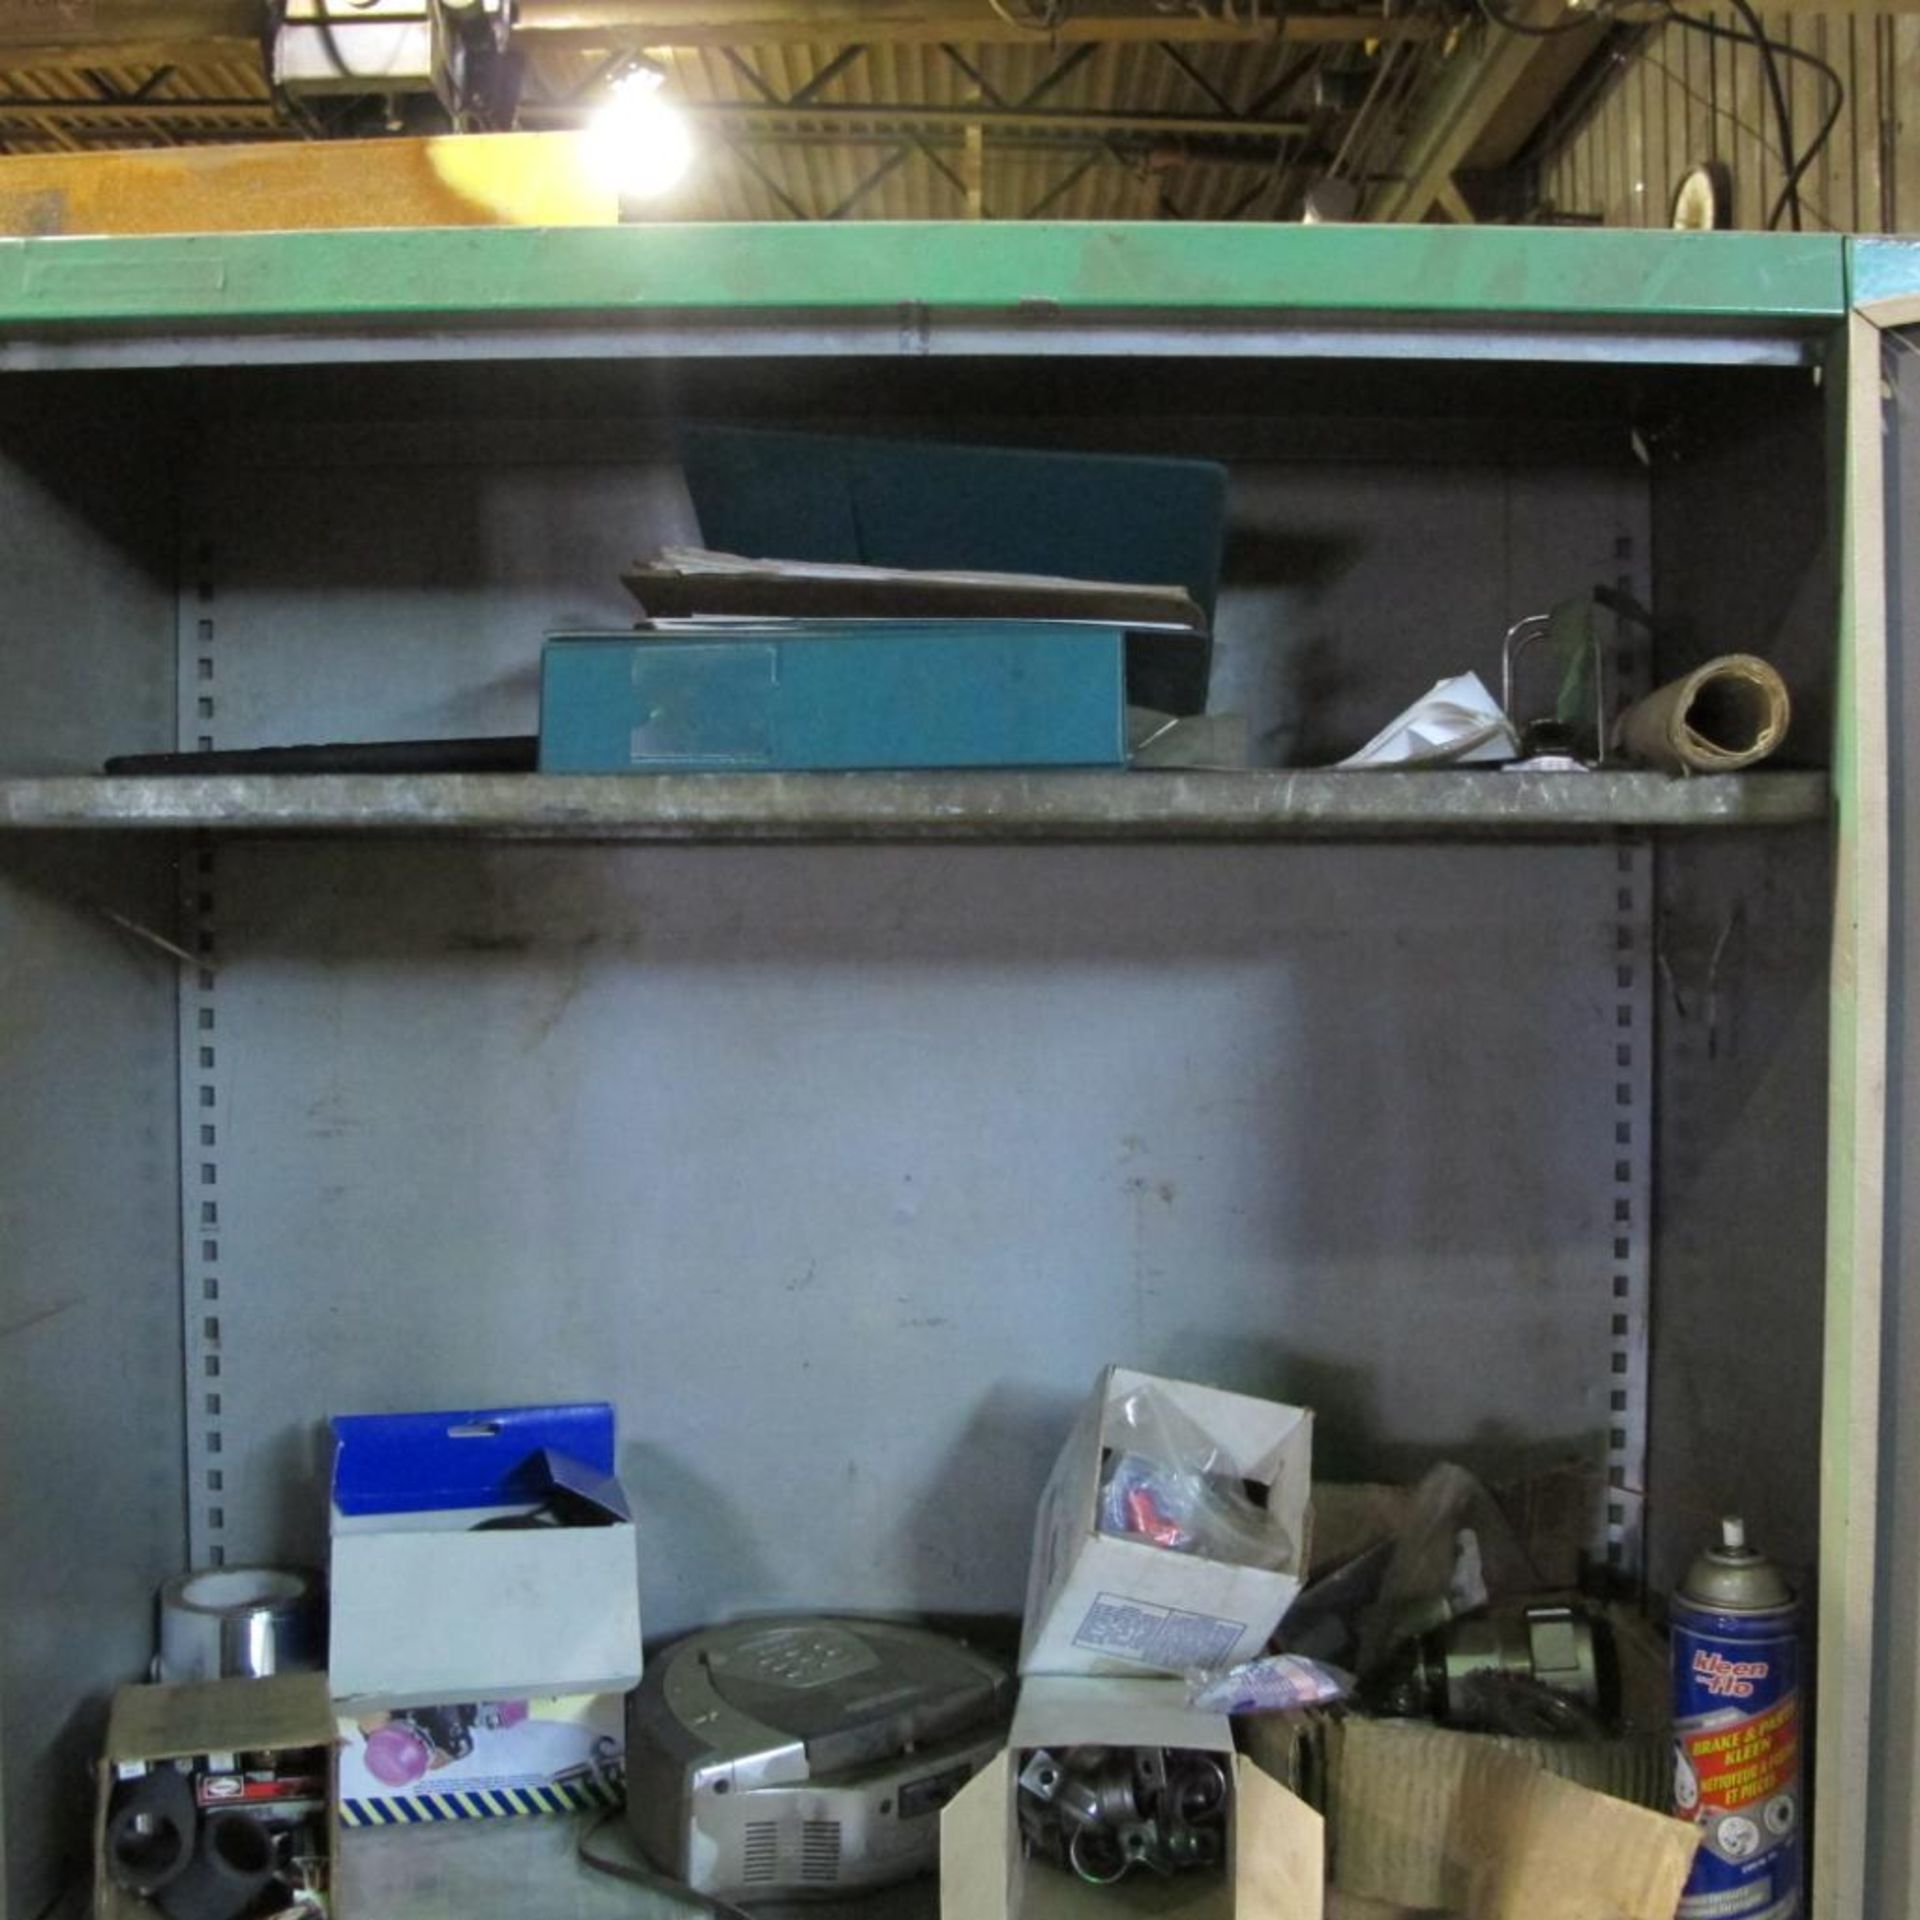 WORK BENCH, 2 DOOR CABINET W/SUPPLIES, SMALL TABLE W/CONTENTS (PLASMA CUTTING BAY) - Image 3 of 5